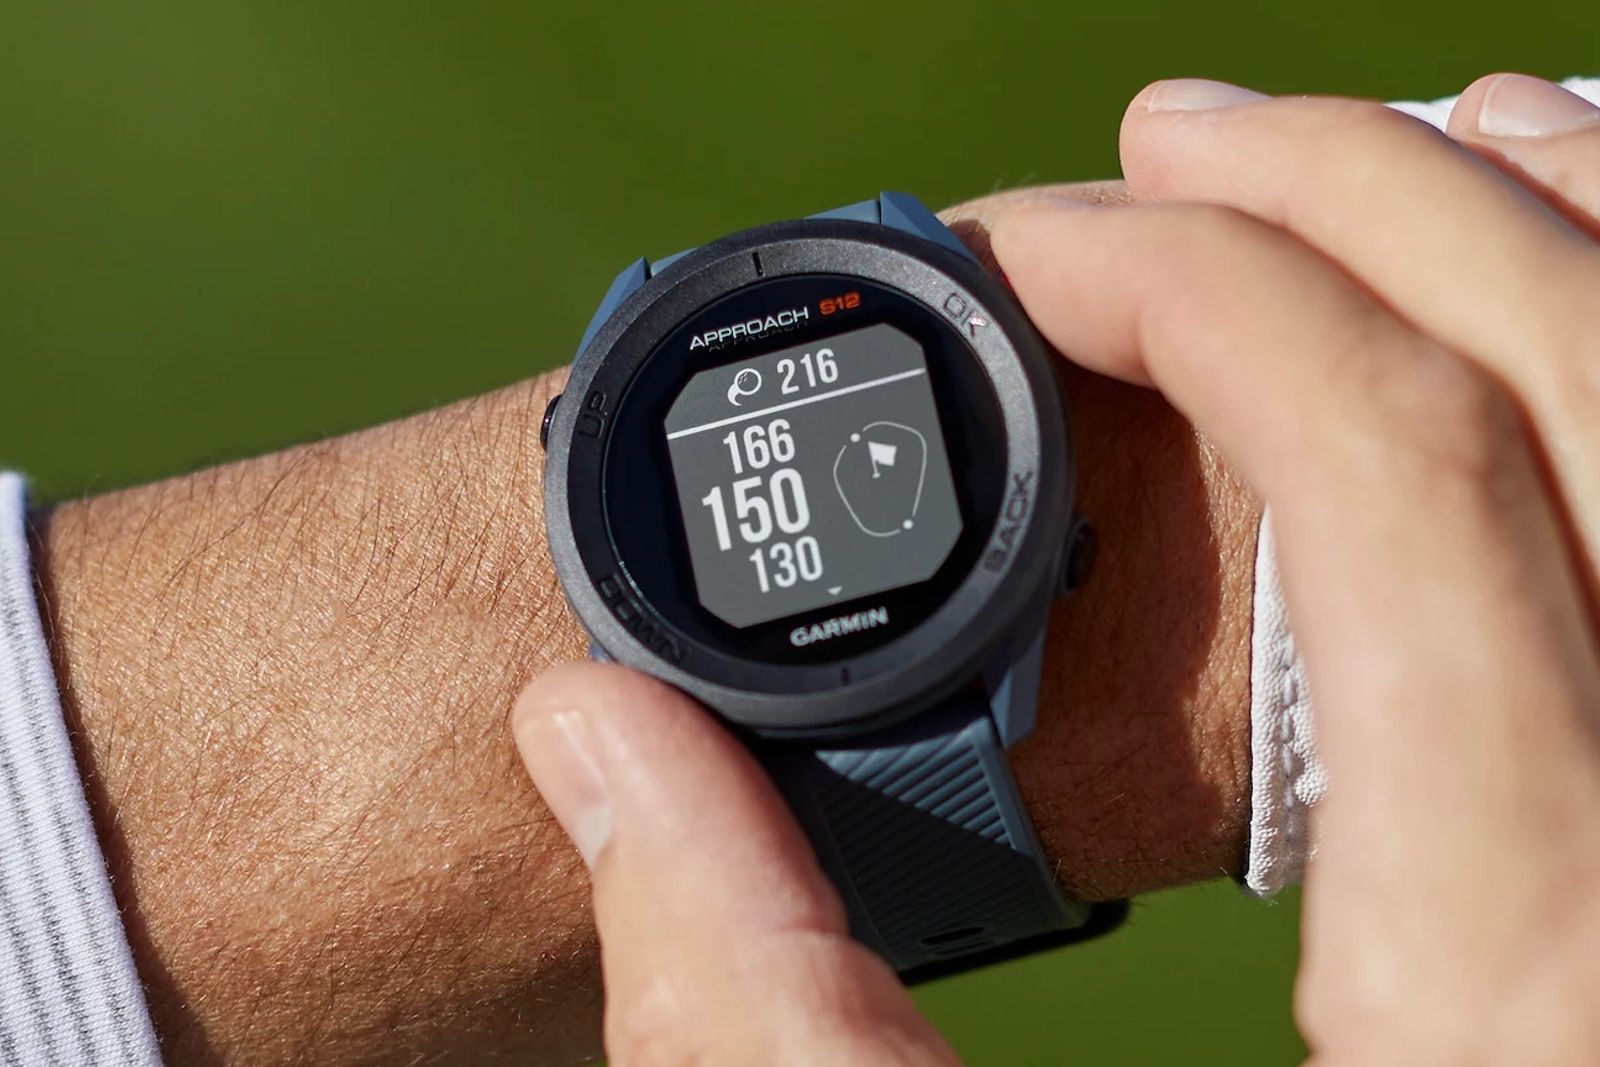 Garmin updates its golf wearables for 2021 - Approach S42, S12 and G12 all announced photo 3